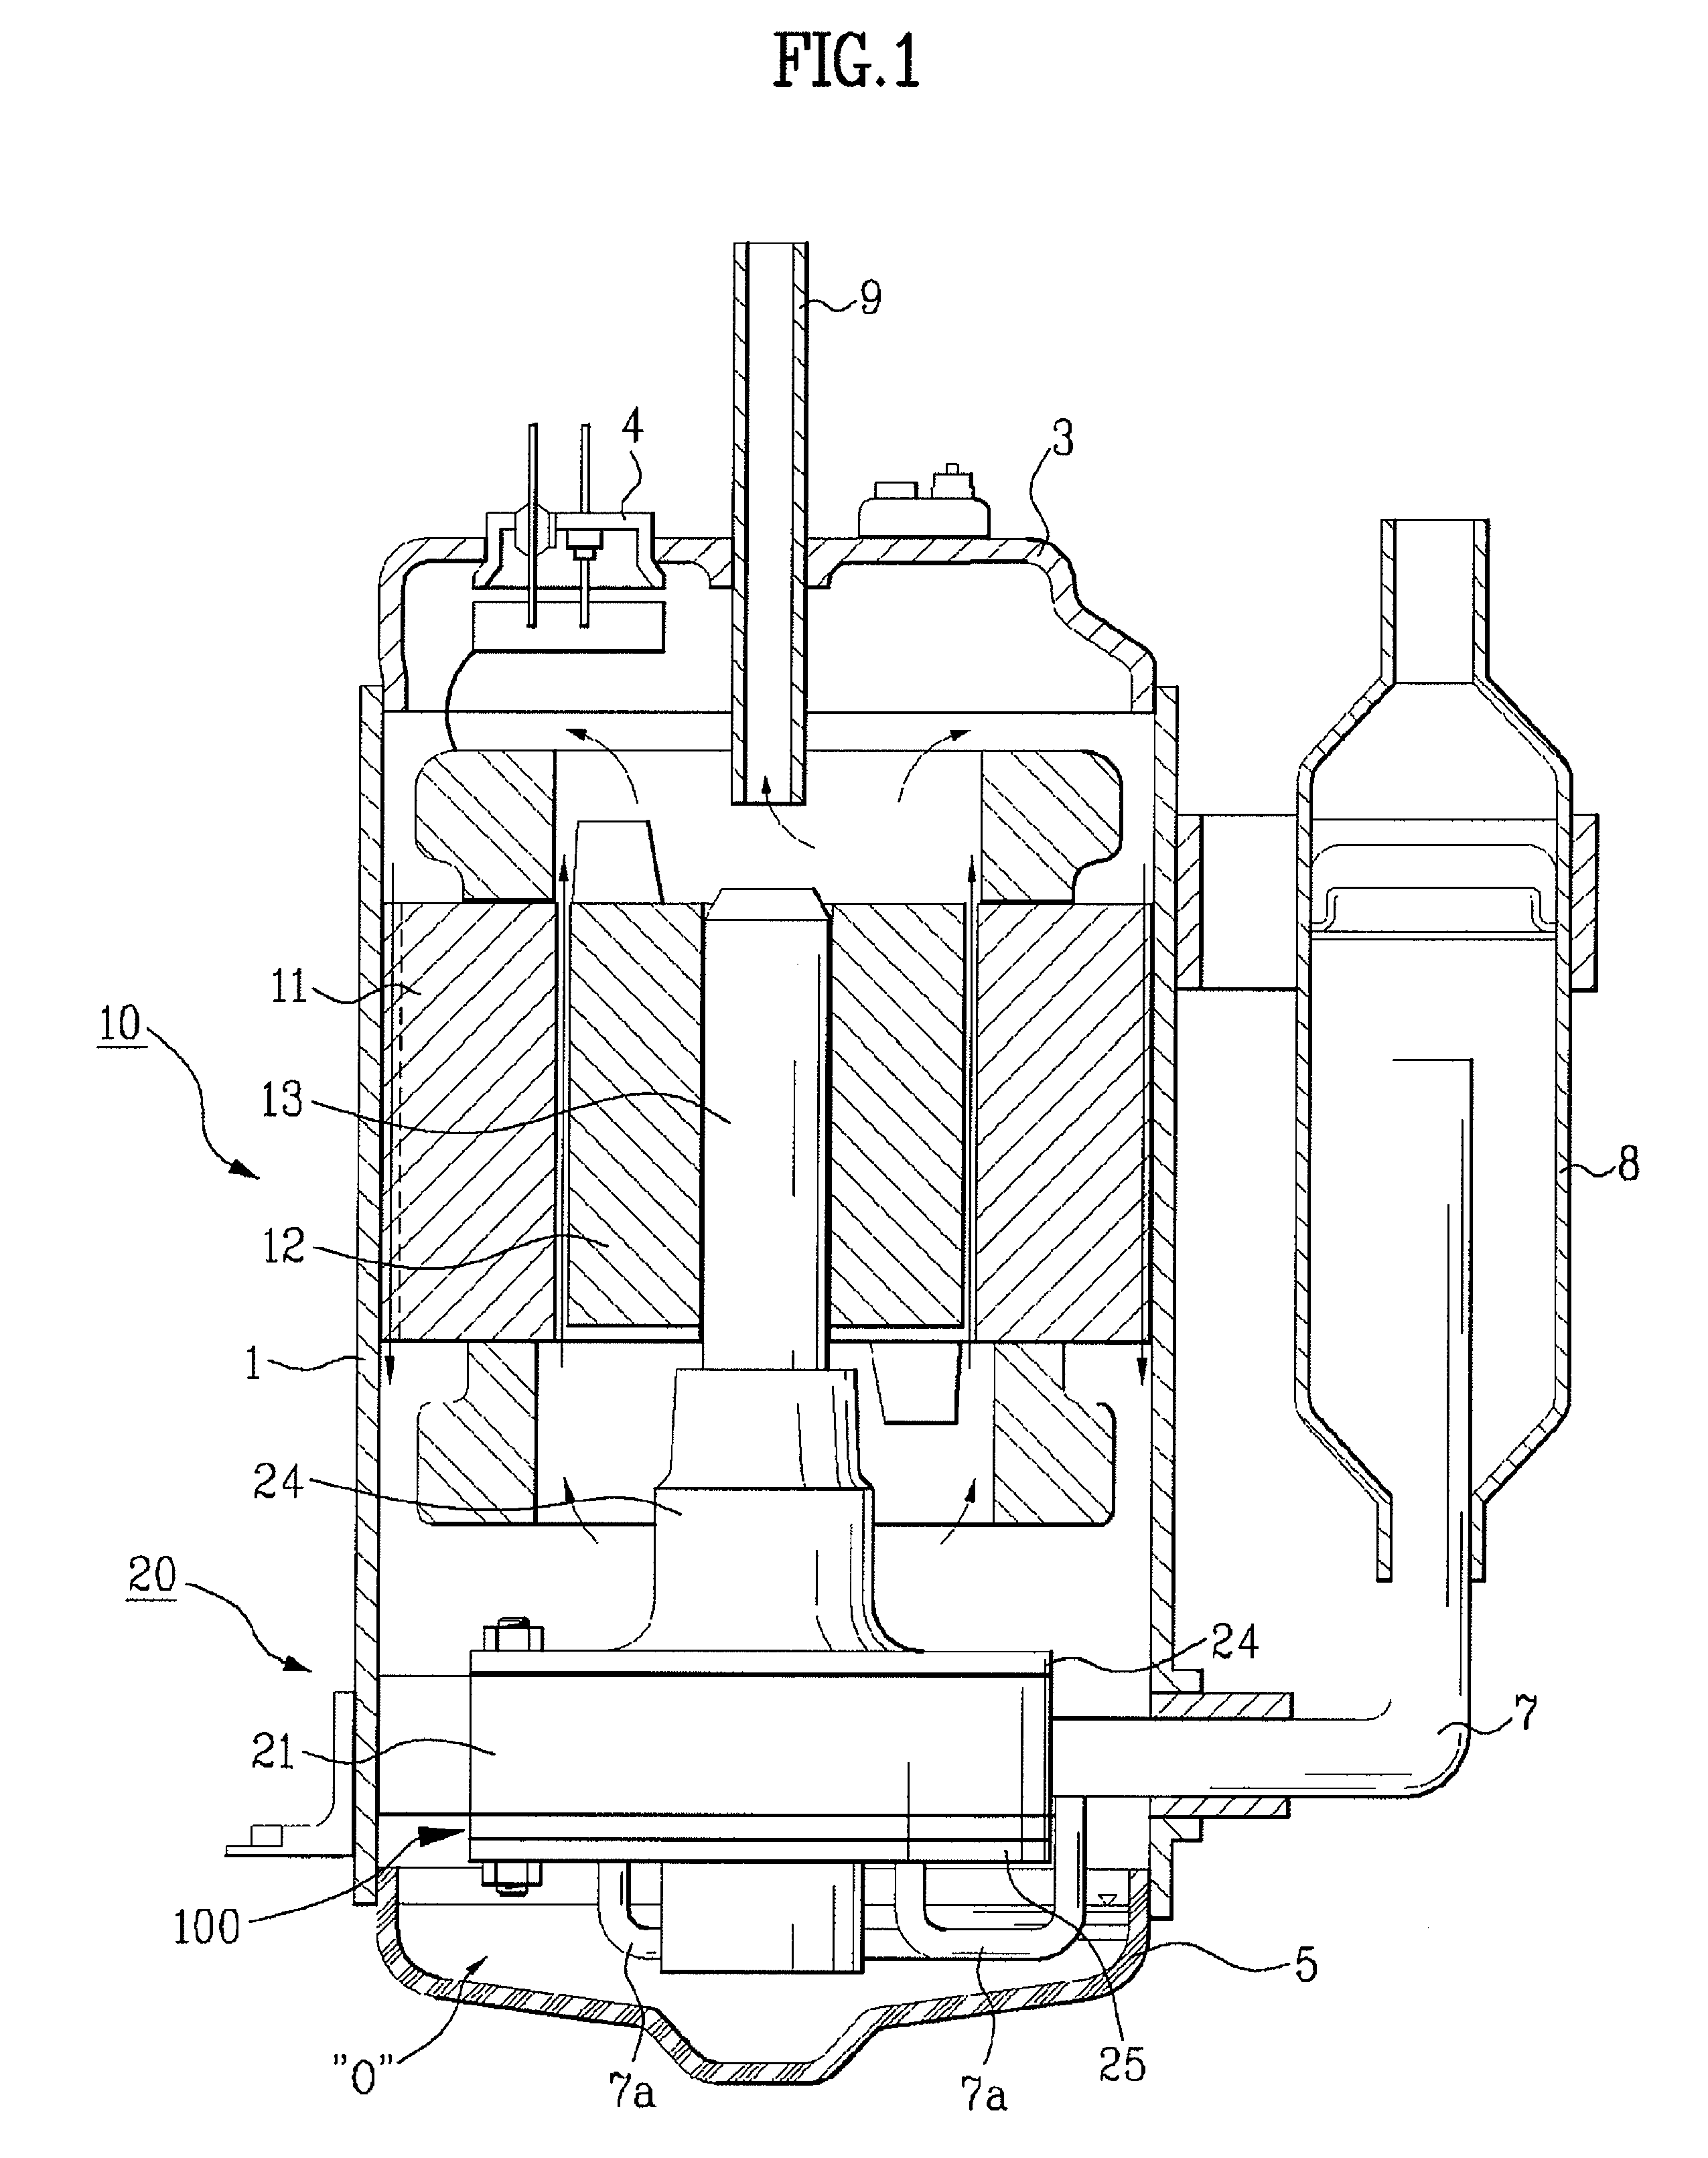 Rotary compressor for changing compression capacity